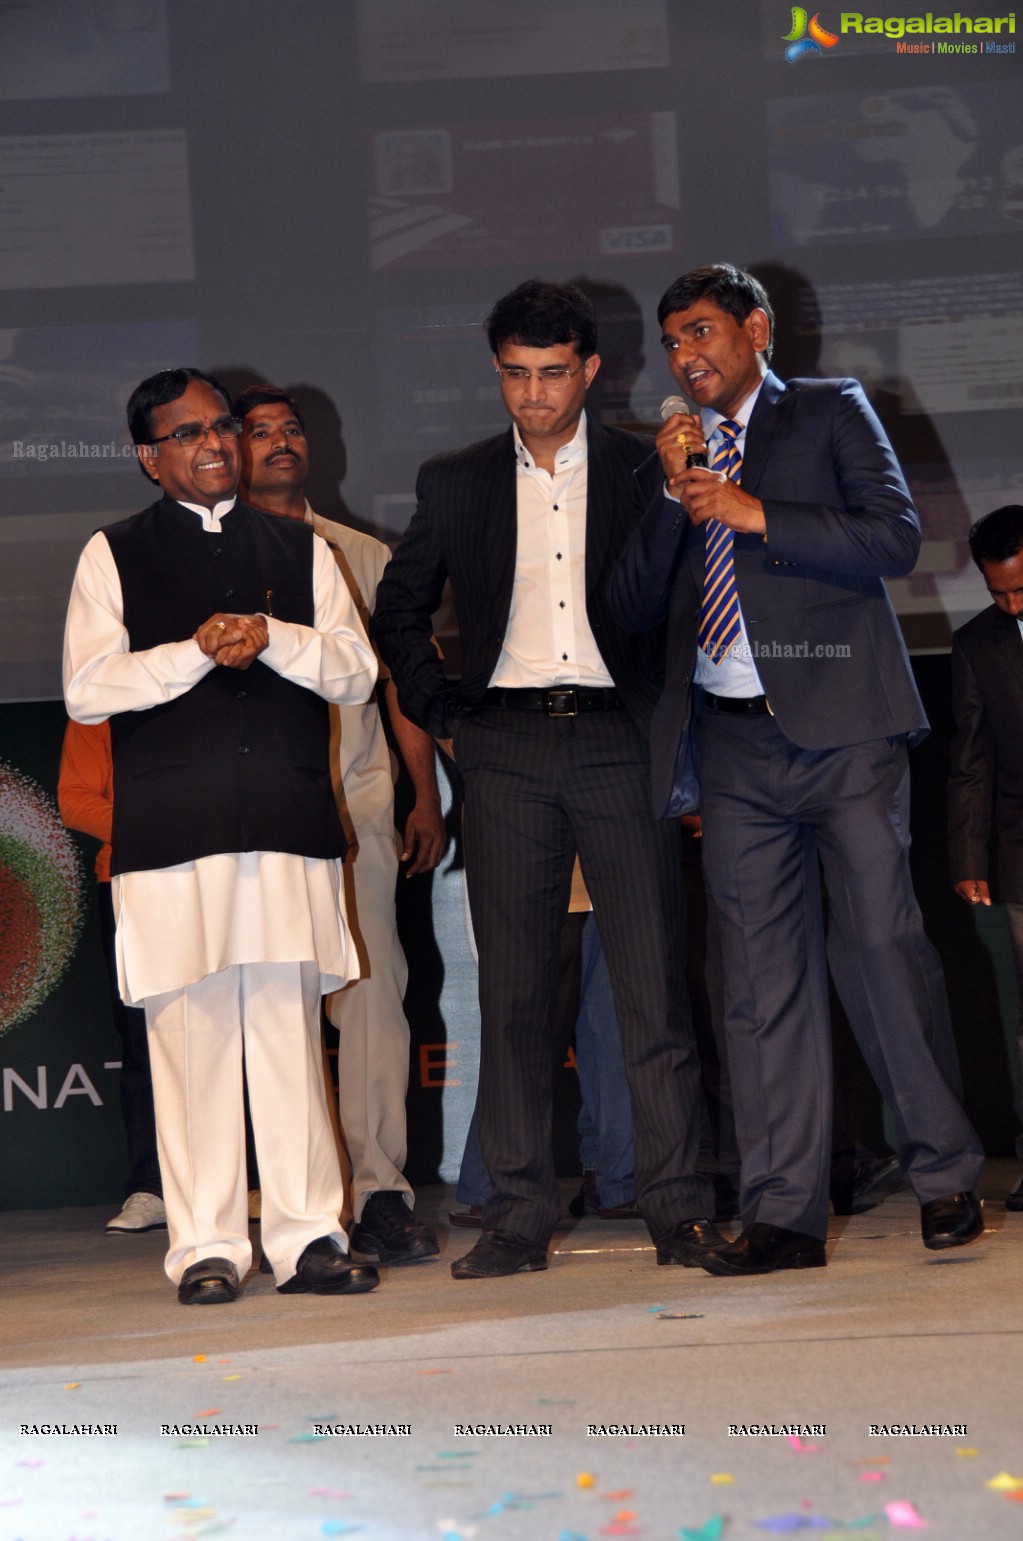 Sourav Ganguly launches One Nation One Card